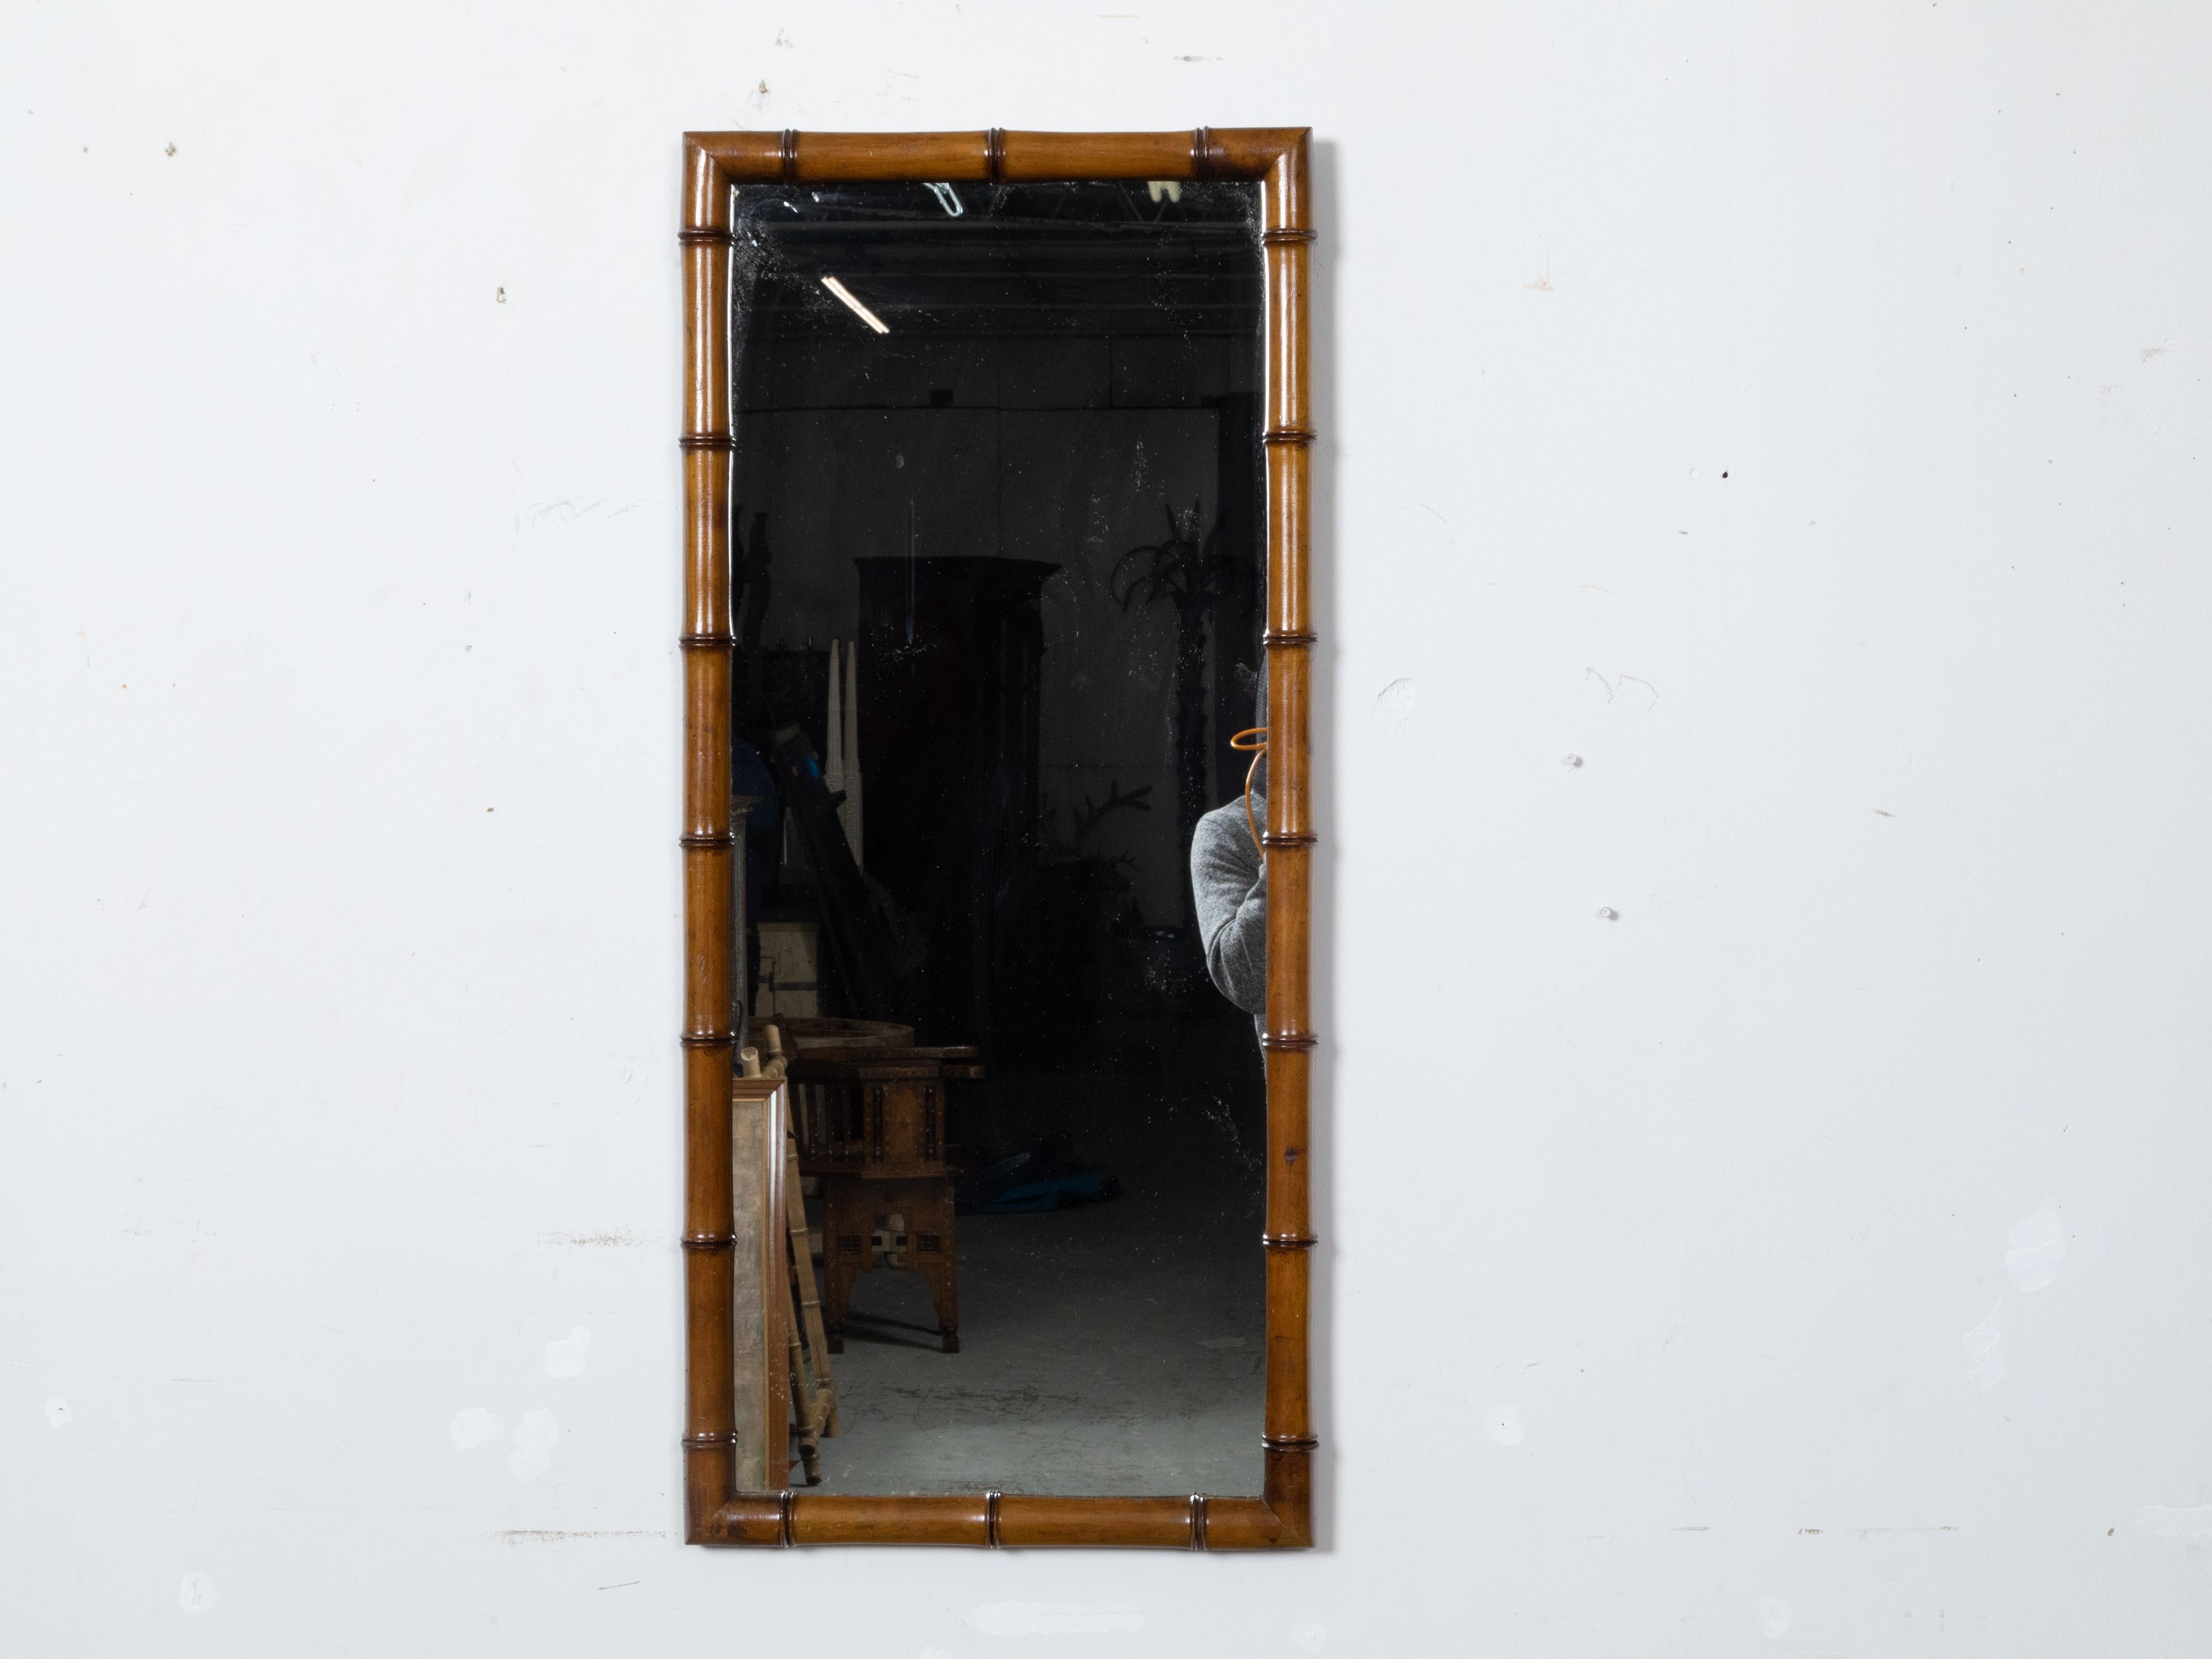 This French faux bamboo mirror from the Turn of the Century, circa 1900, features simple lines, a clear mirror plate, and a warm brown patina. The mirror embodies the understated sophistication characteristic of French design during this period,